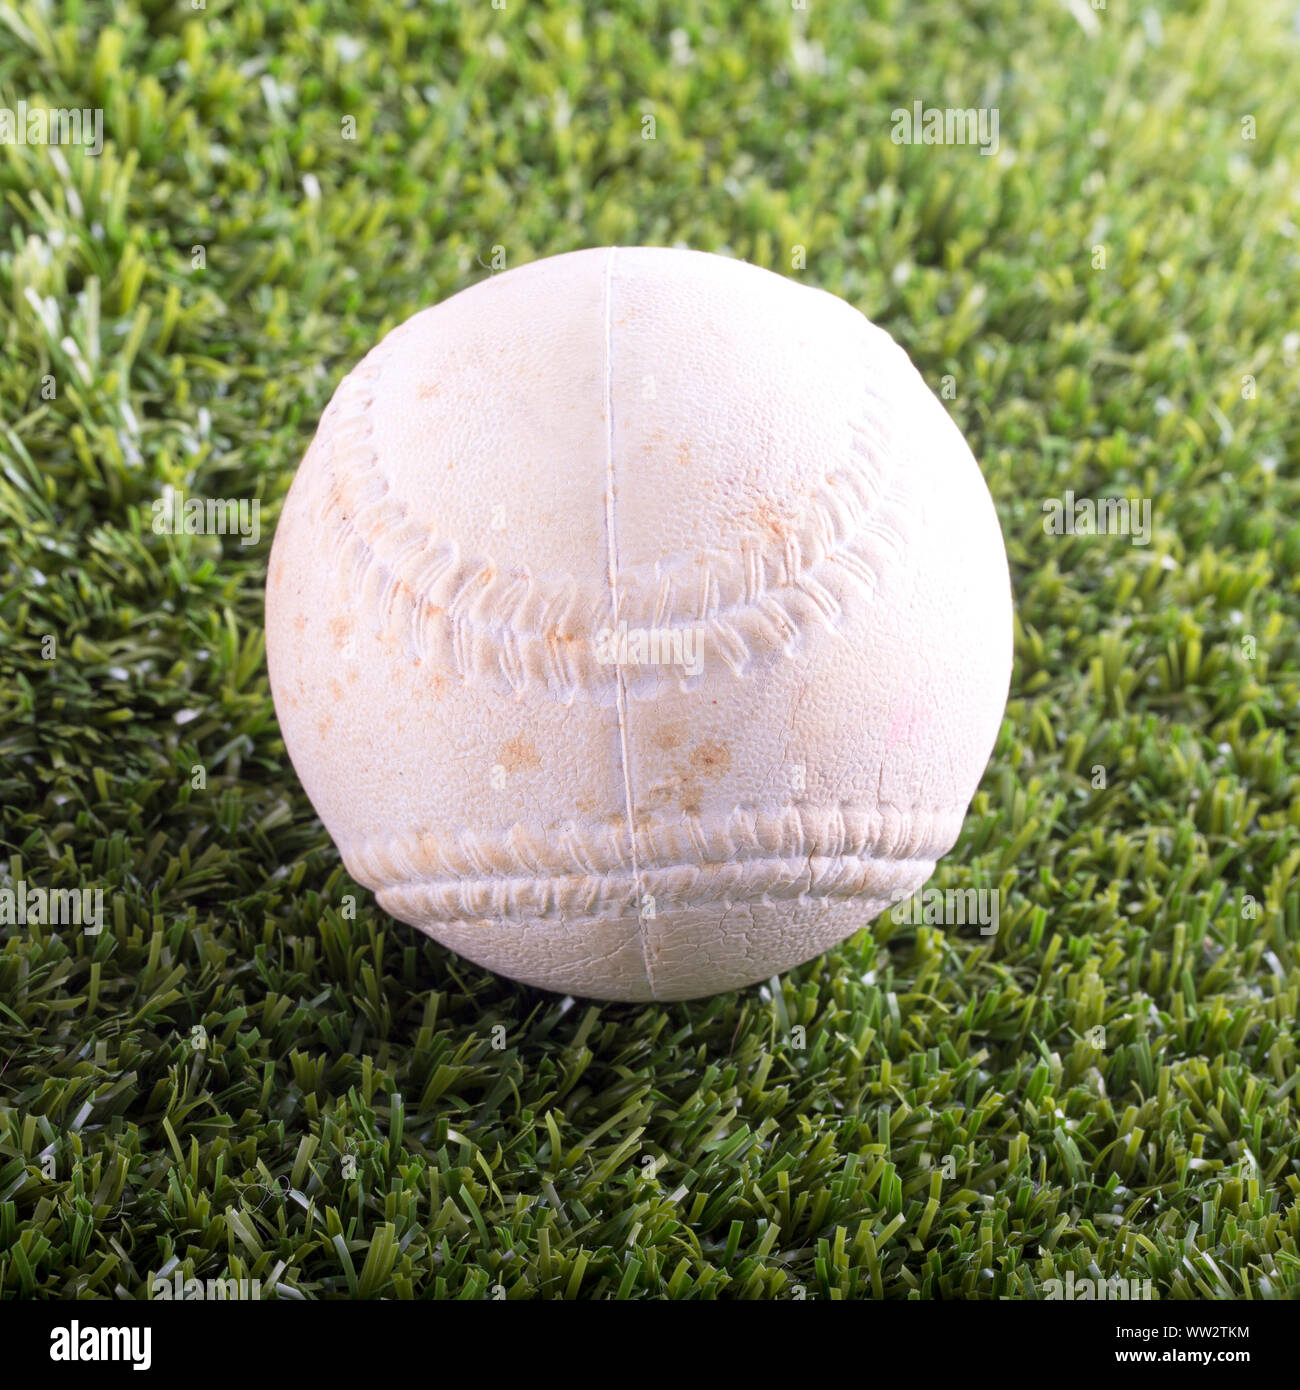 White baseball over synthetic grass, square image Stock Photo